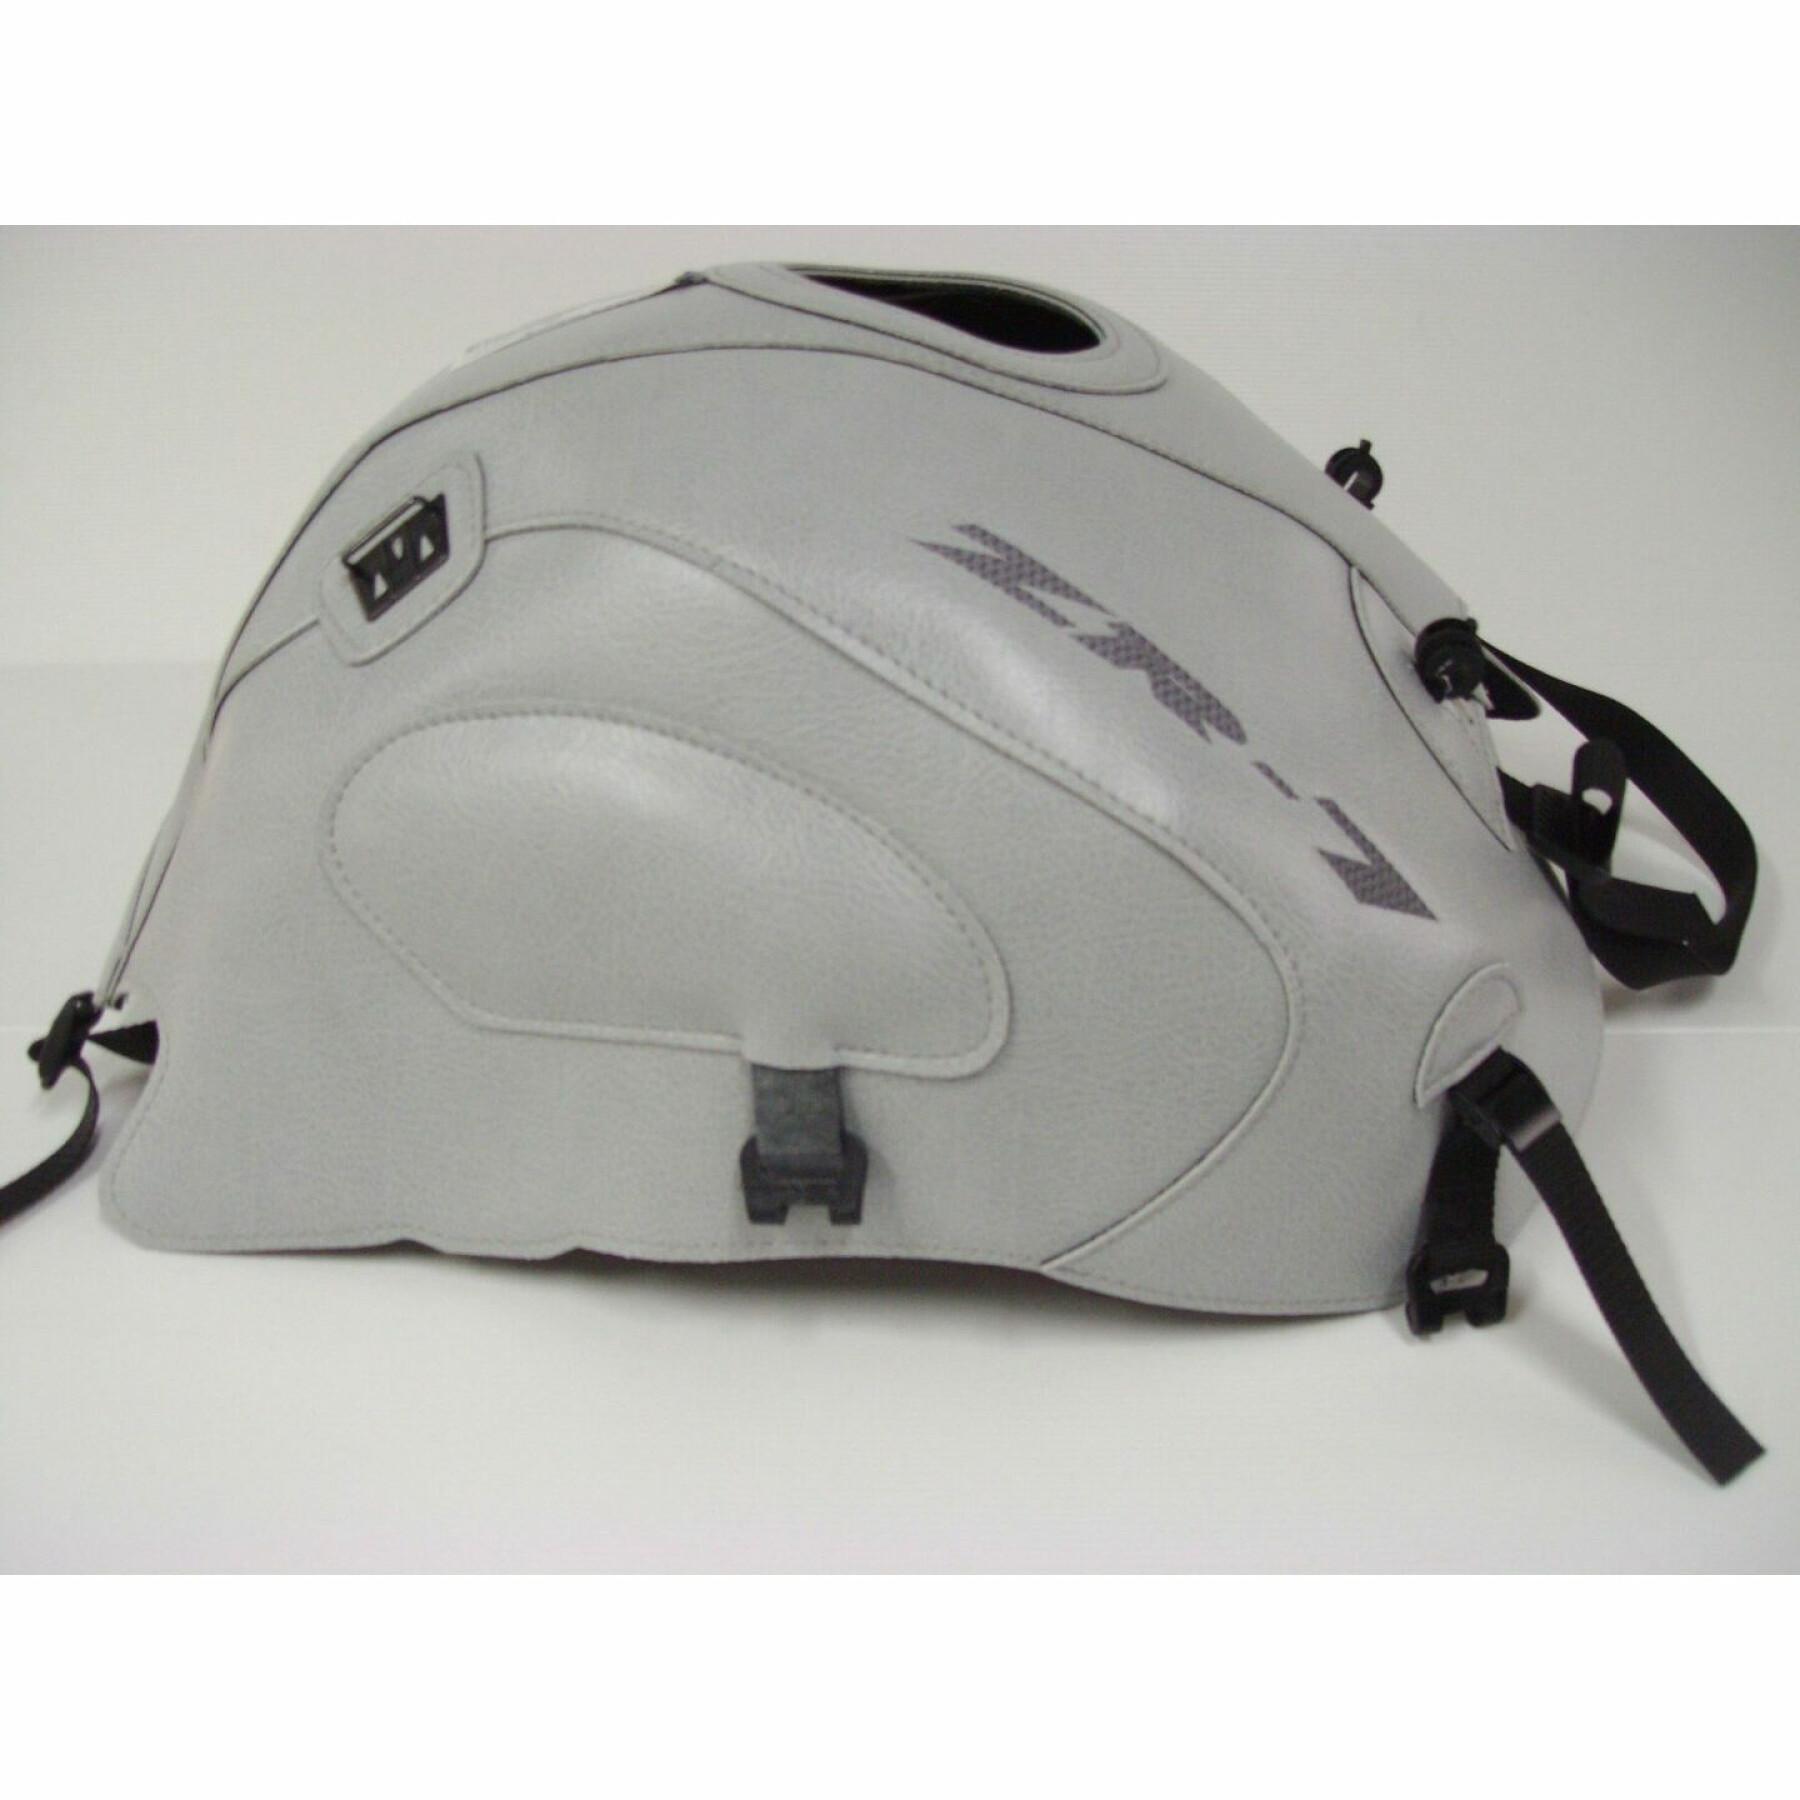 Motorcycle tank cover Bagster zr 7